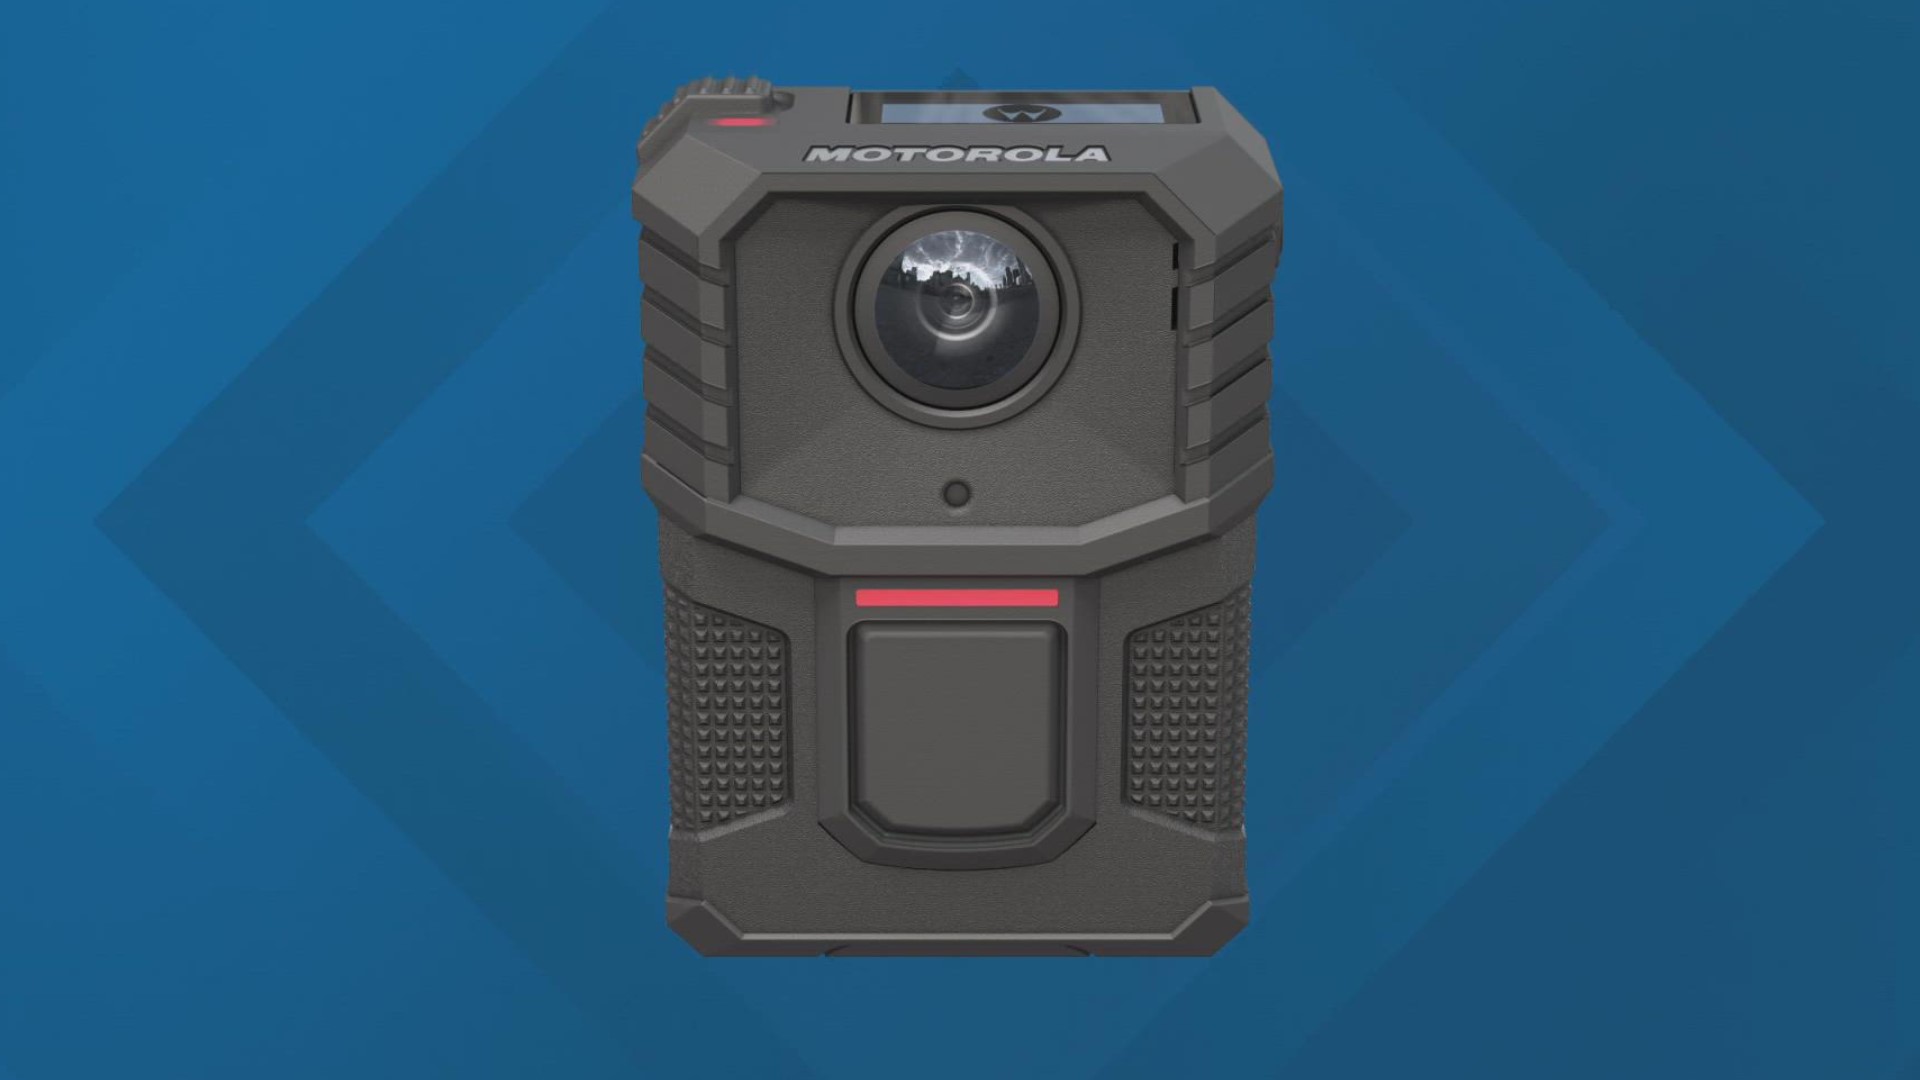 As part of the program, deputies will be using the Motorola Solutions V300 continuous-operation body-worn cameras on service calls across all shifts.